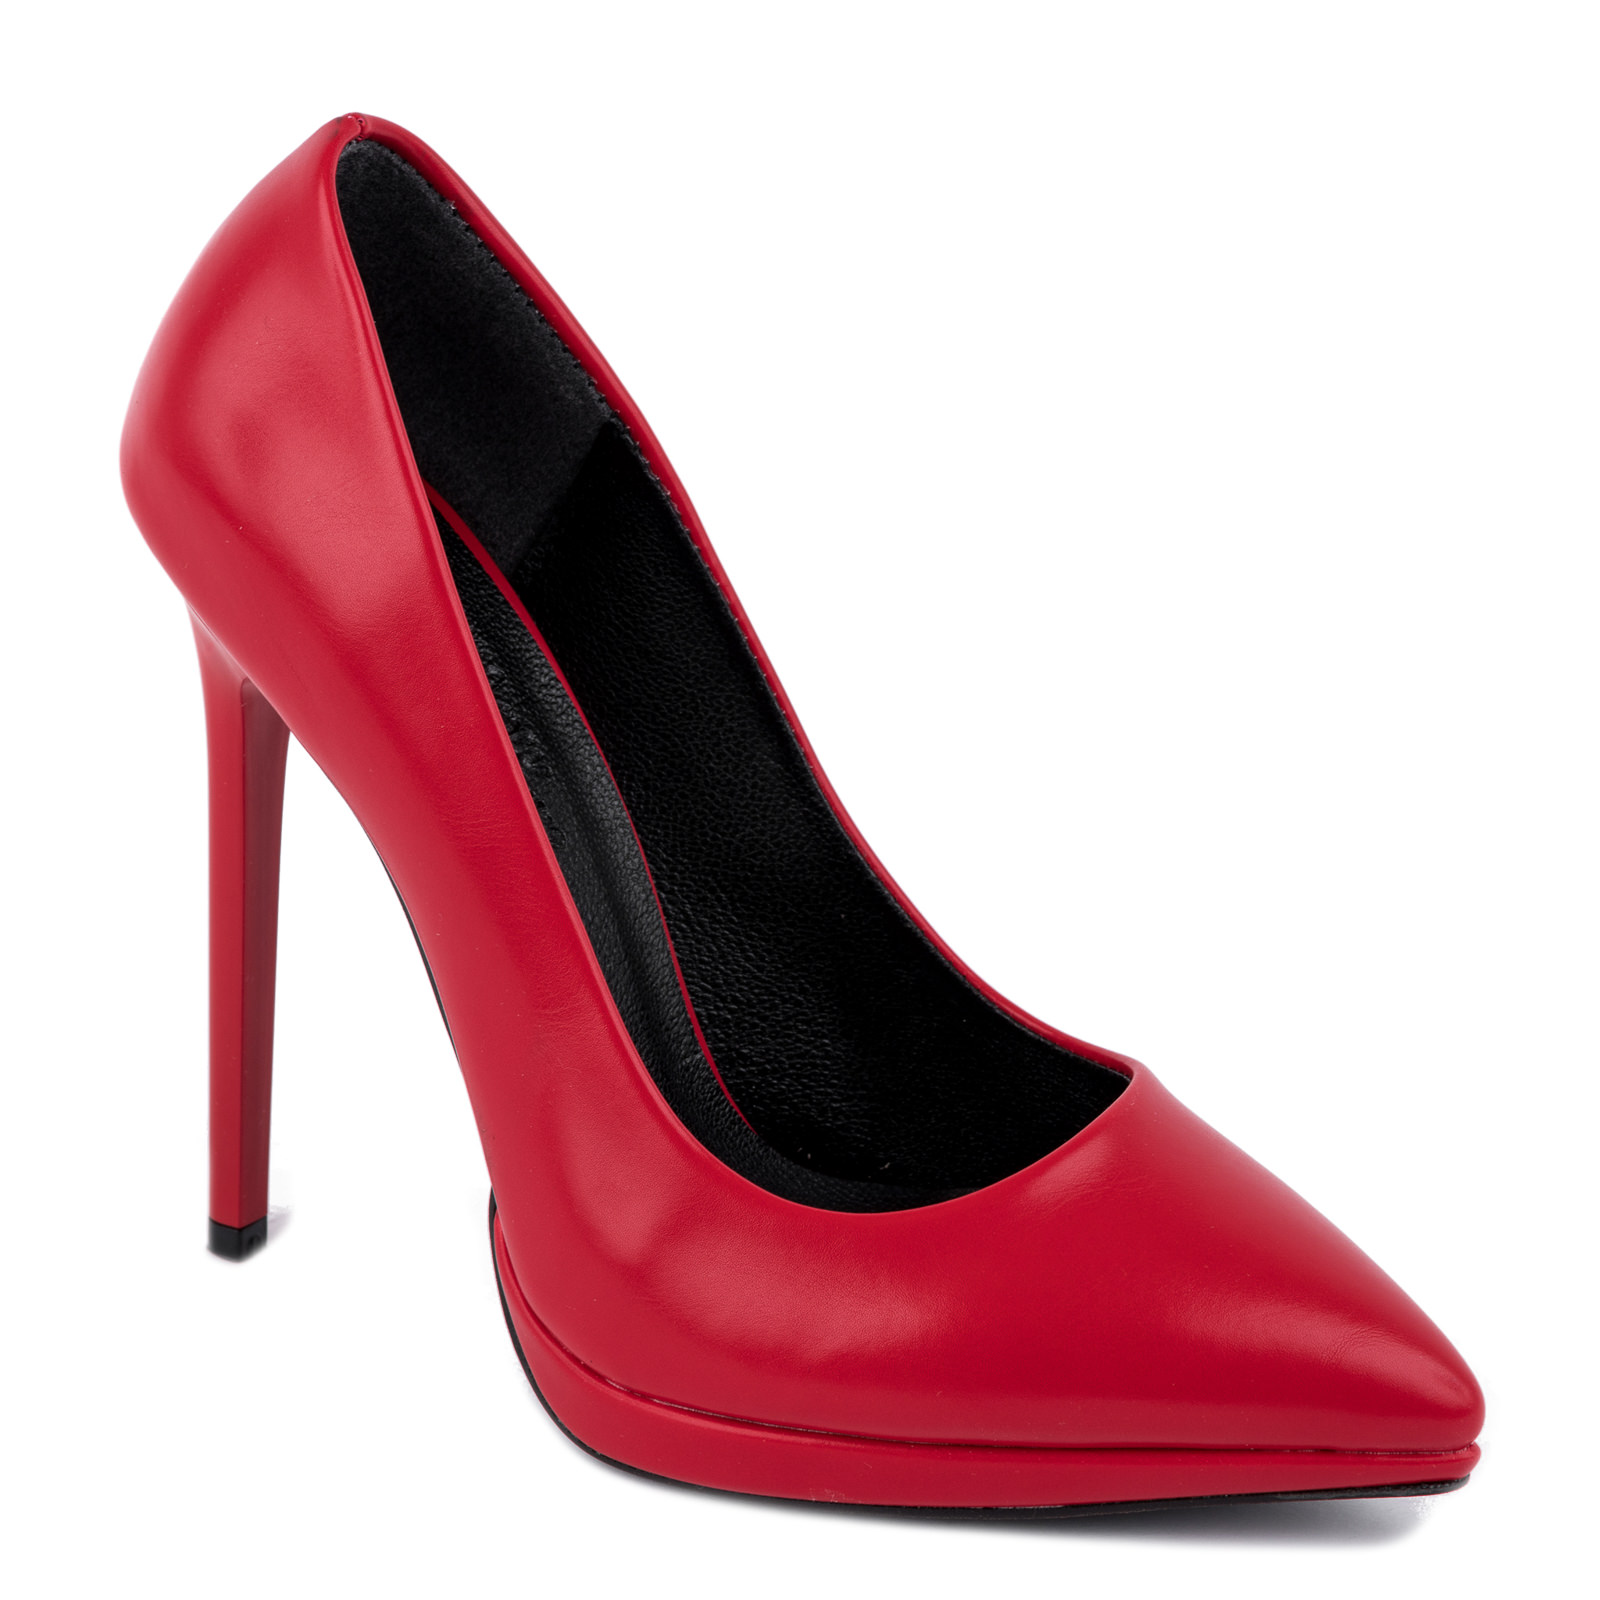 STILETTO SHOES WITH THIN HEEL - RED